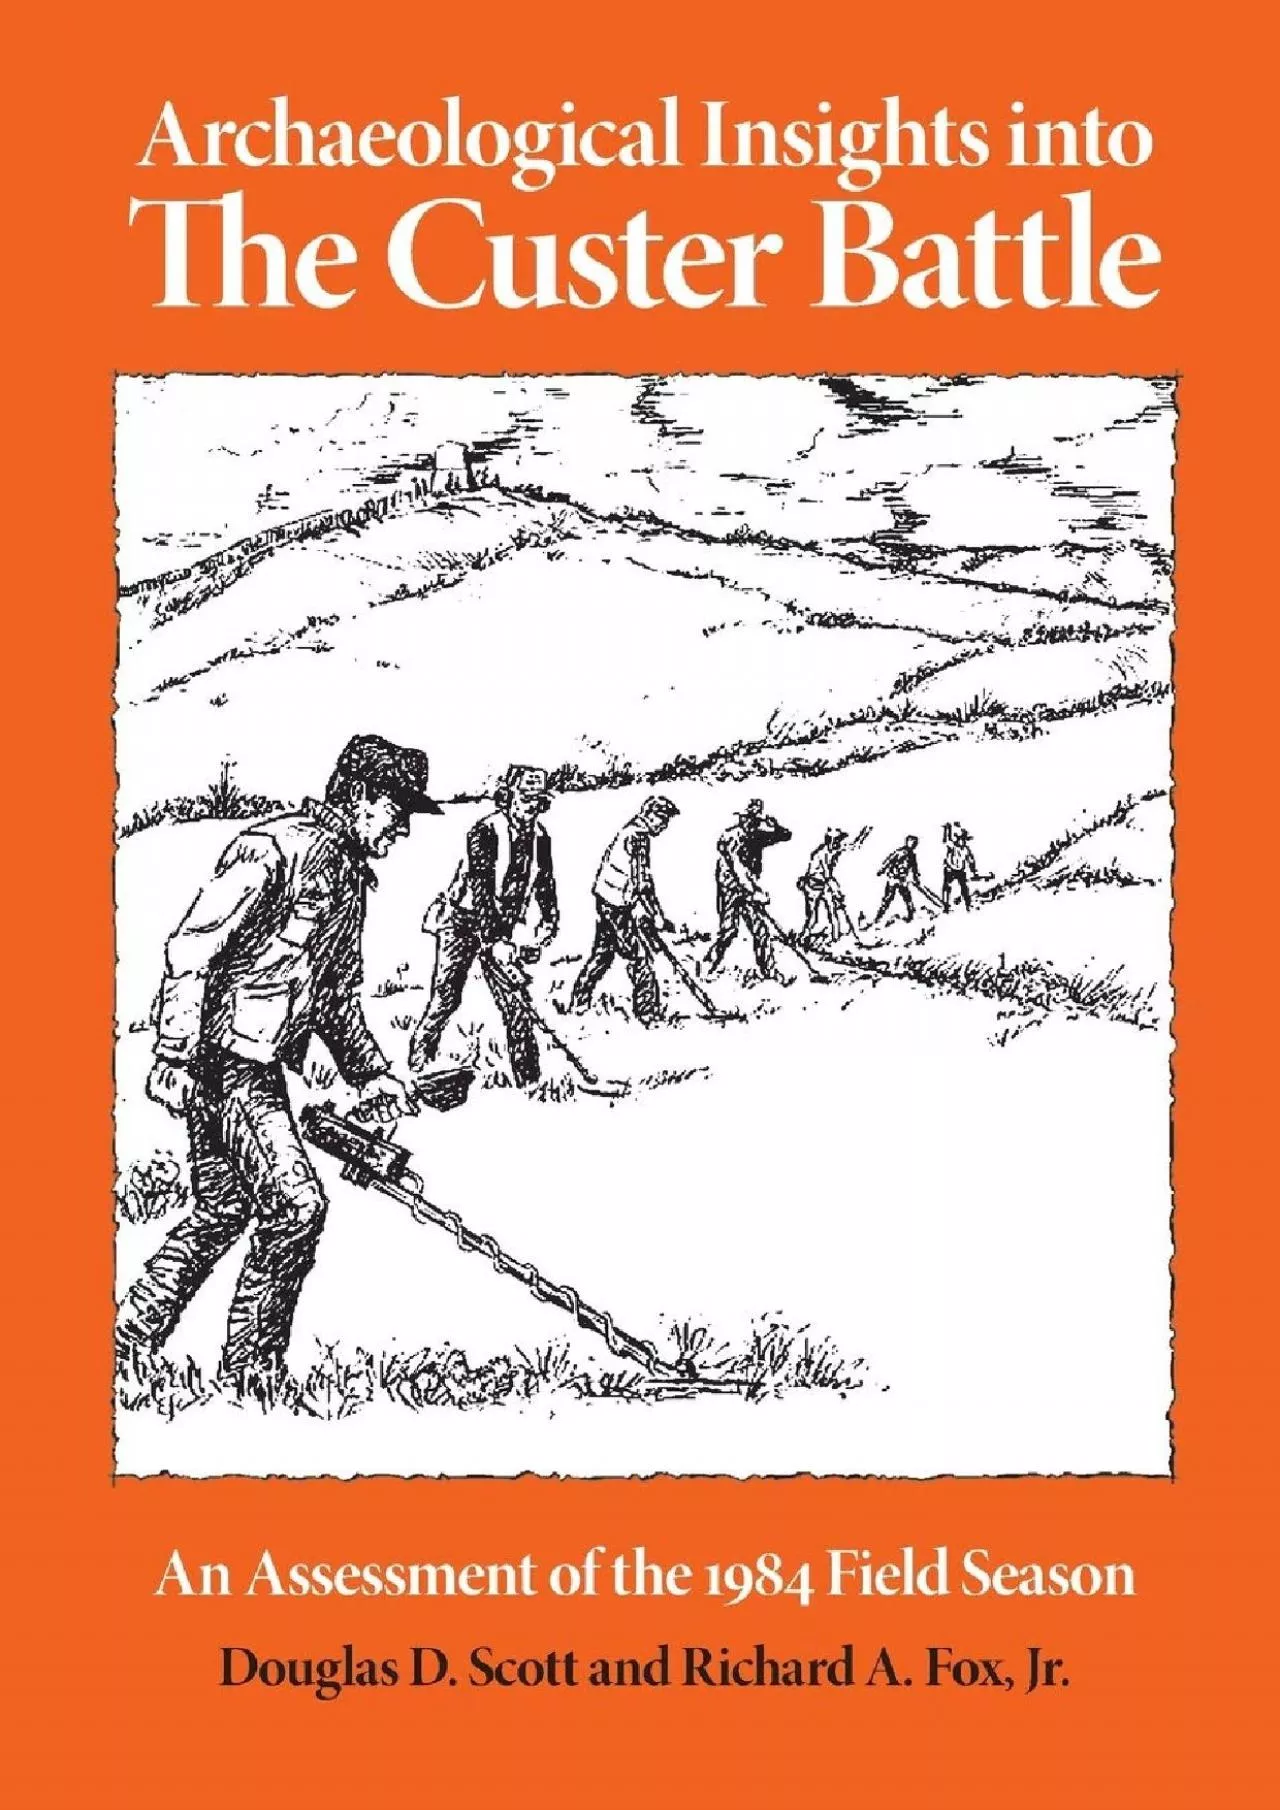 (EBOOK)-Archaeological Insights into the Custer Battle: An Assessment of the 1984 Field